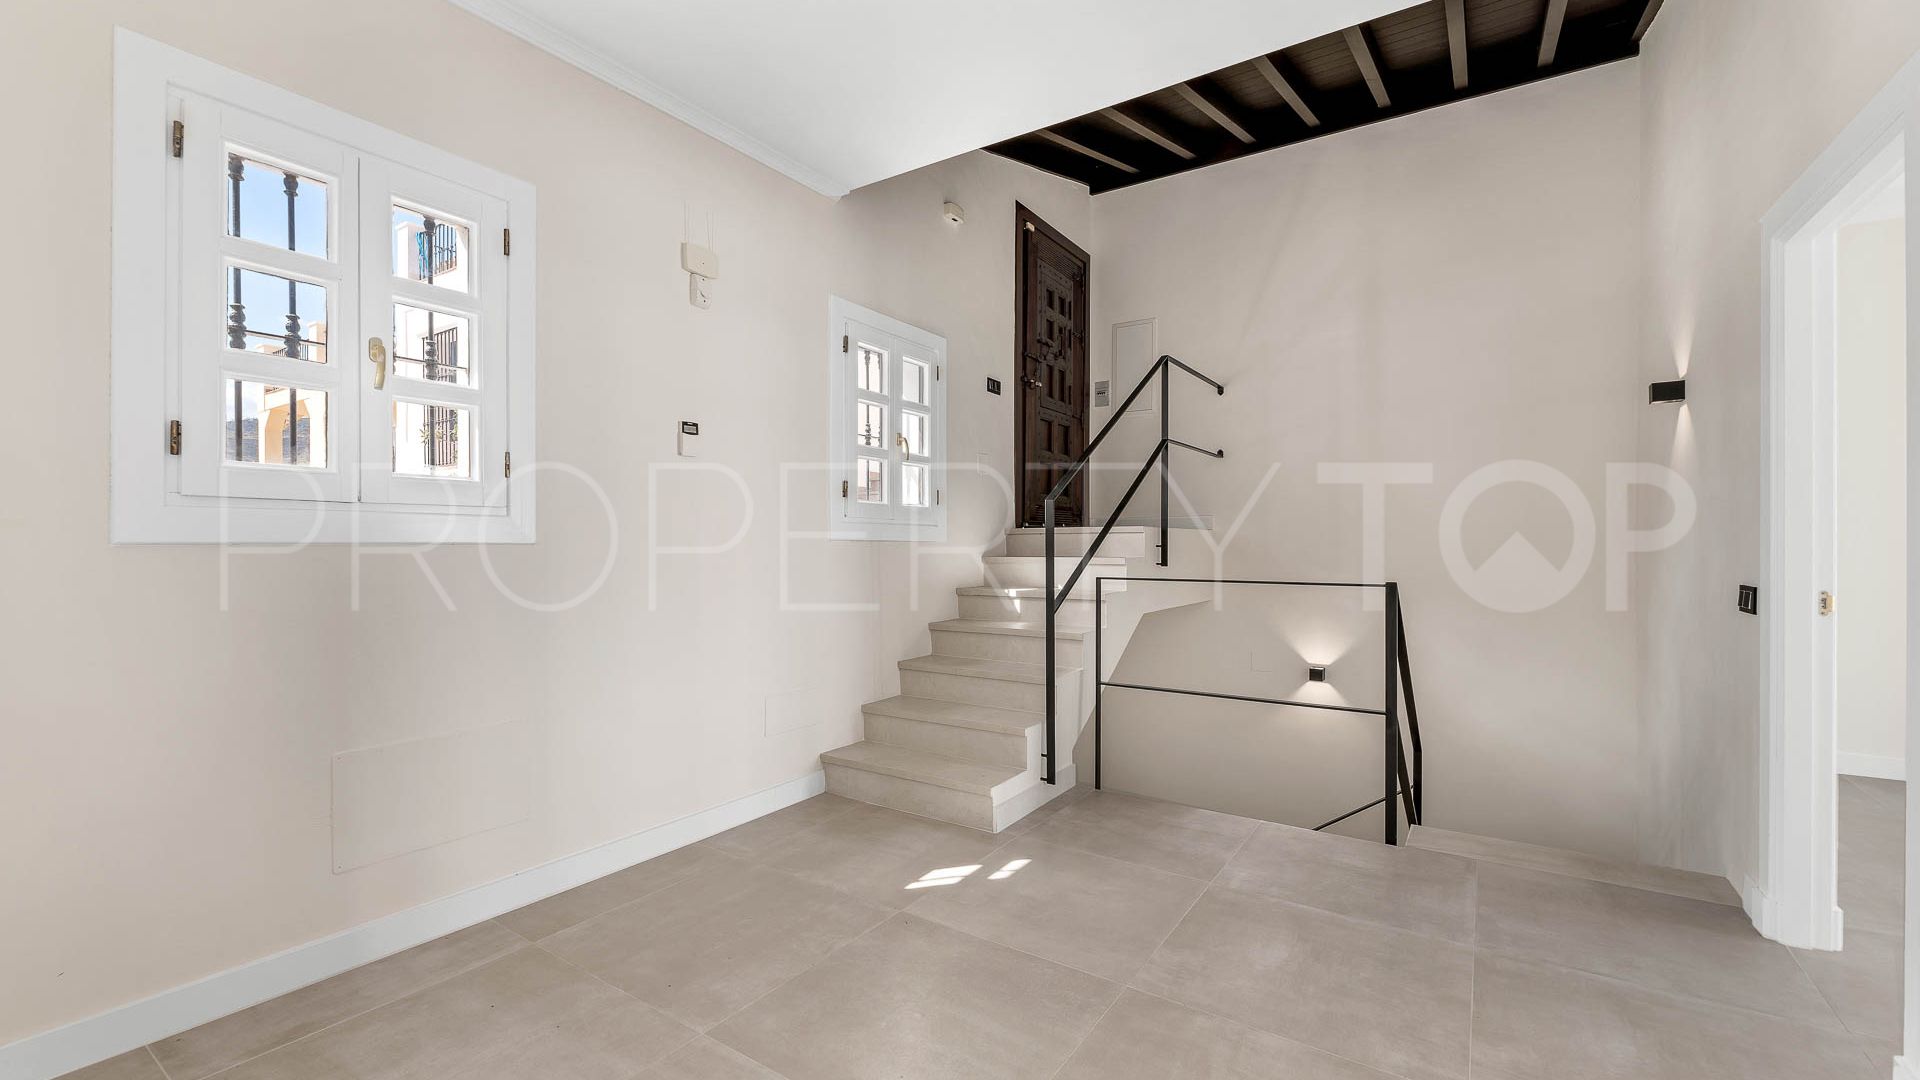 Town house in Monte Mayor for sale